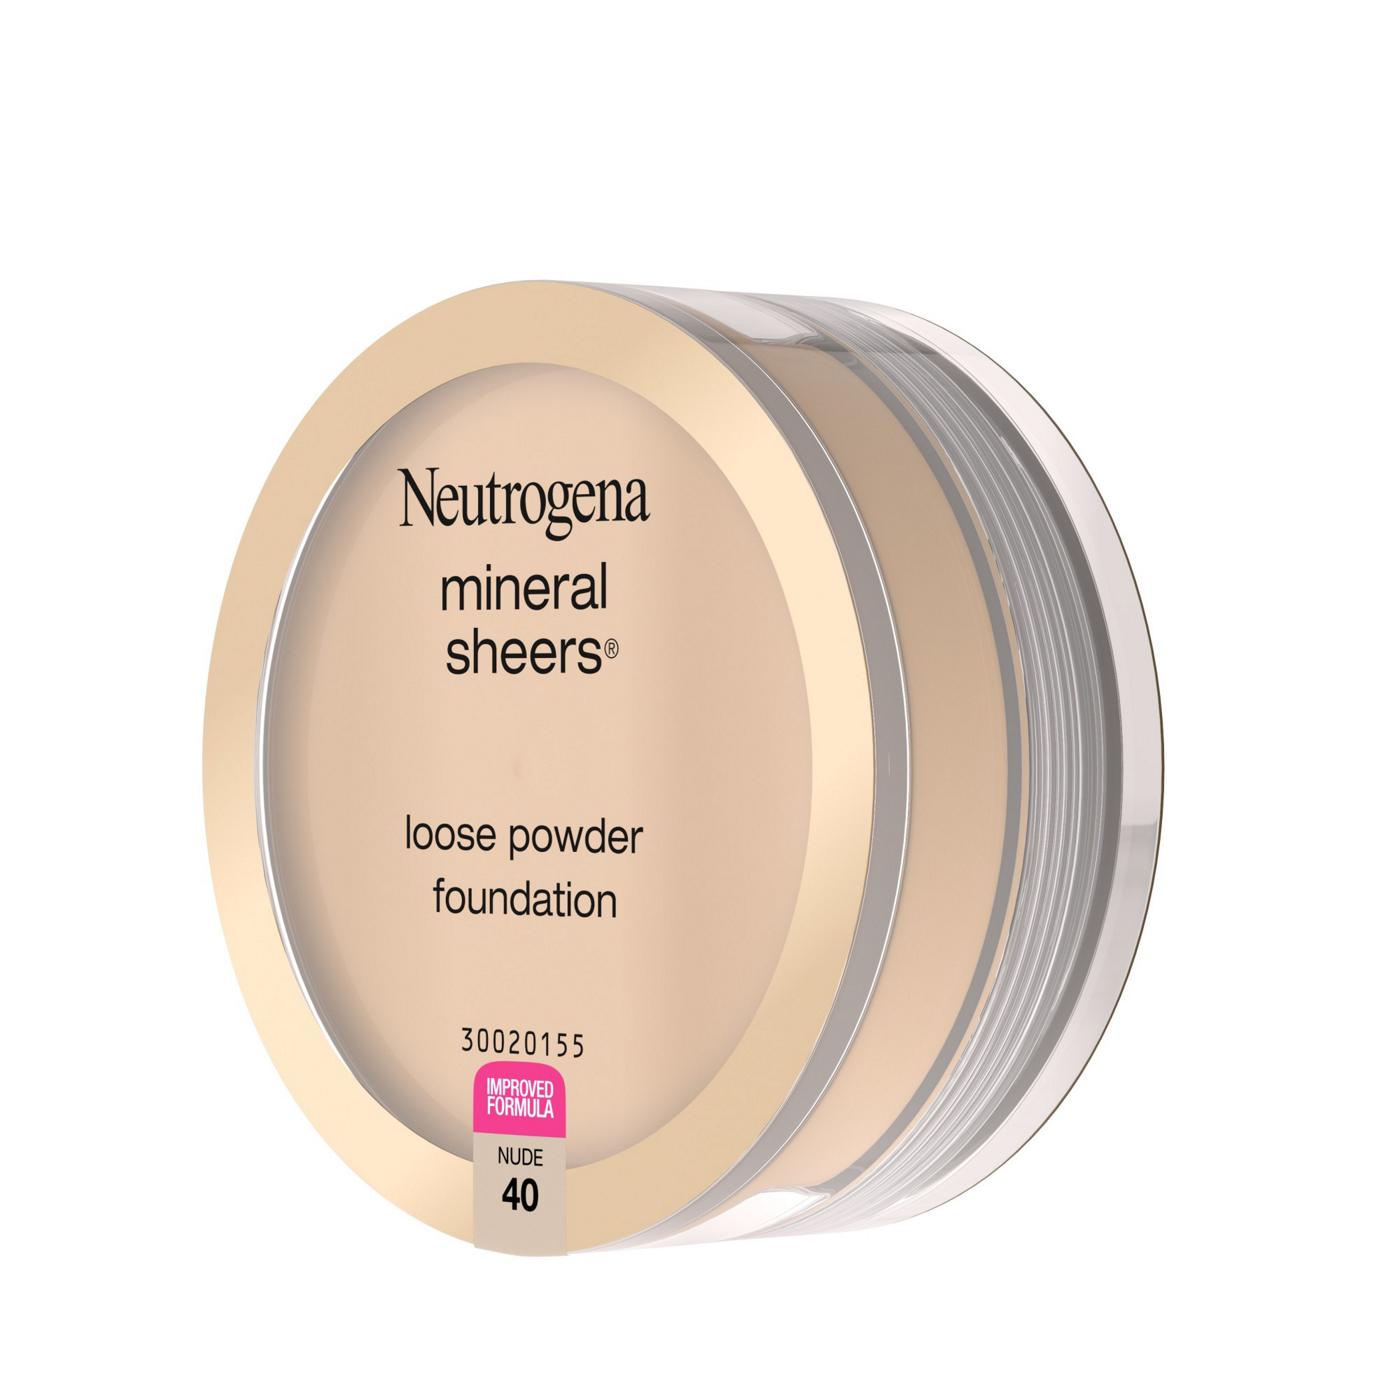 Neutrogena Mineral Sheers Loose Powder Foundation 40 Nude; image 3 of 5